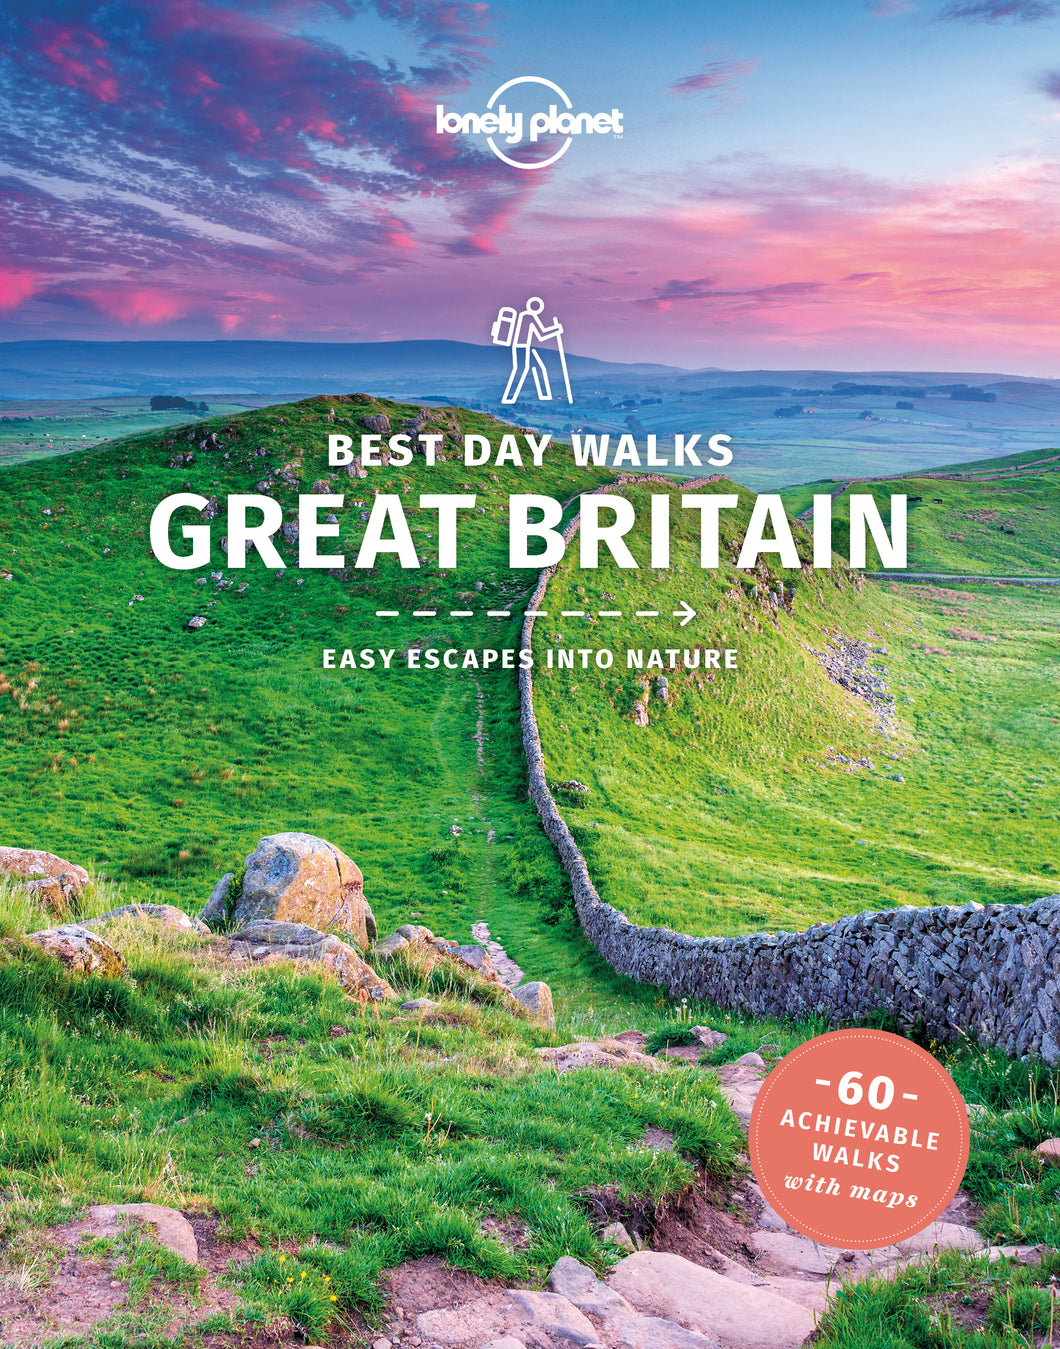 Best Day Walks - Great Britain. Easy escapes into nature. 60 achievable walks.